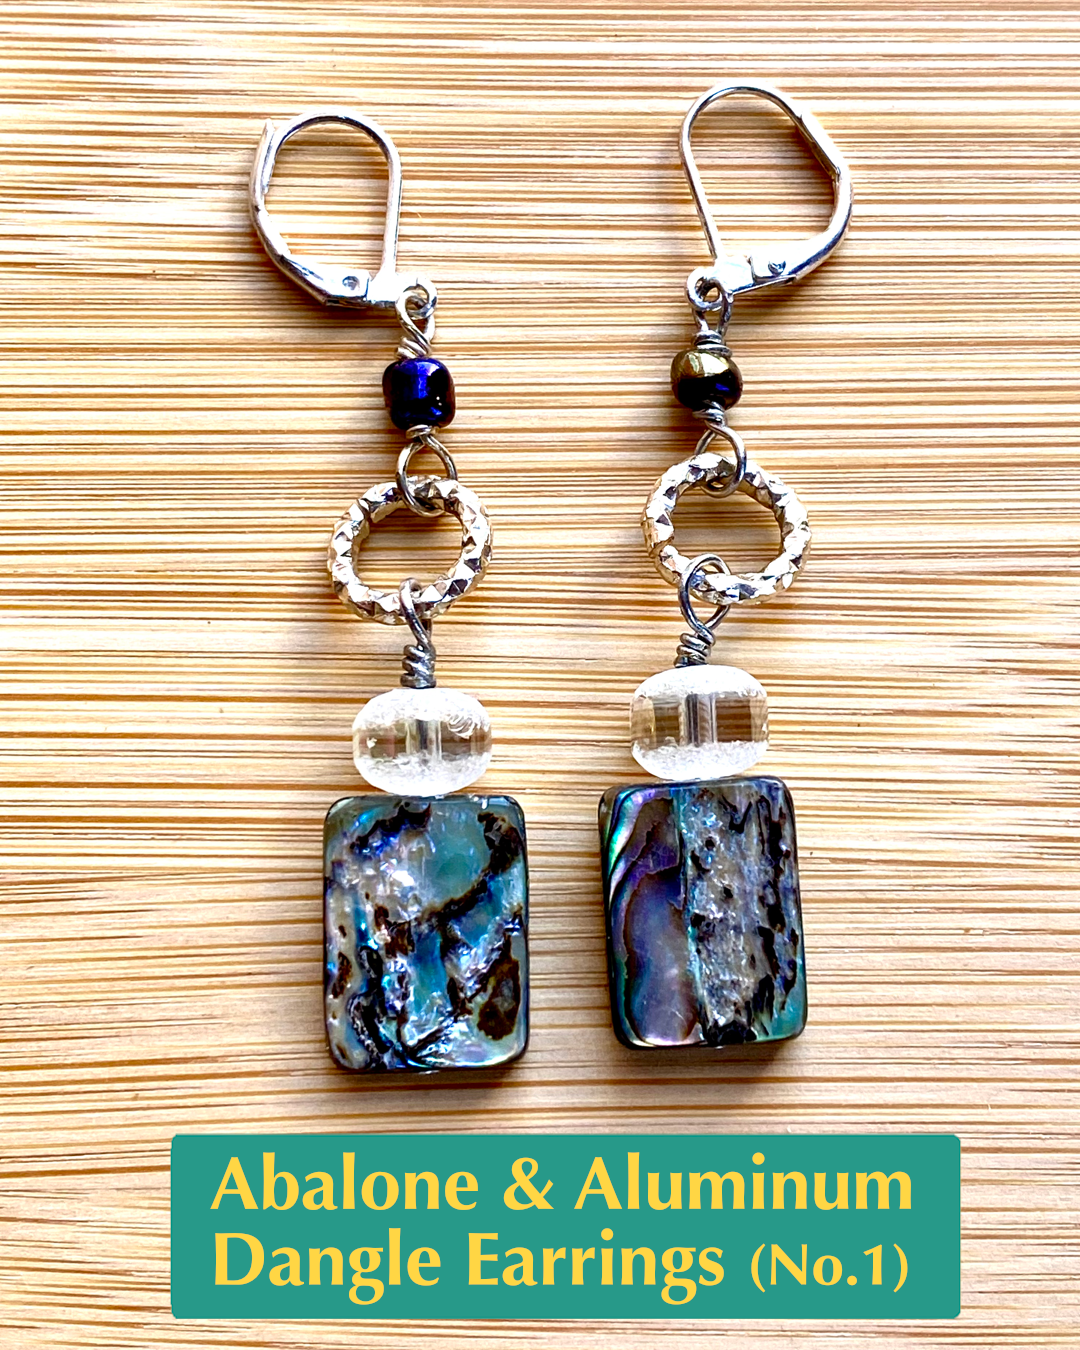 handmade earrings with textured metallic salvaged, aluminum circle charm, metallic striped crystal, and abalone shell beads